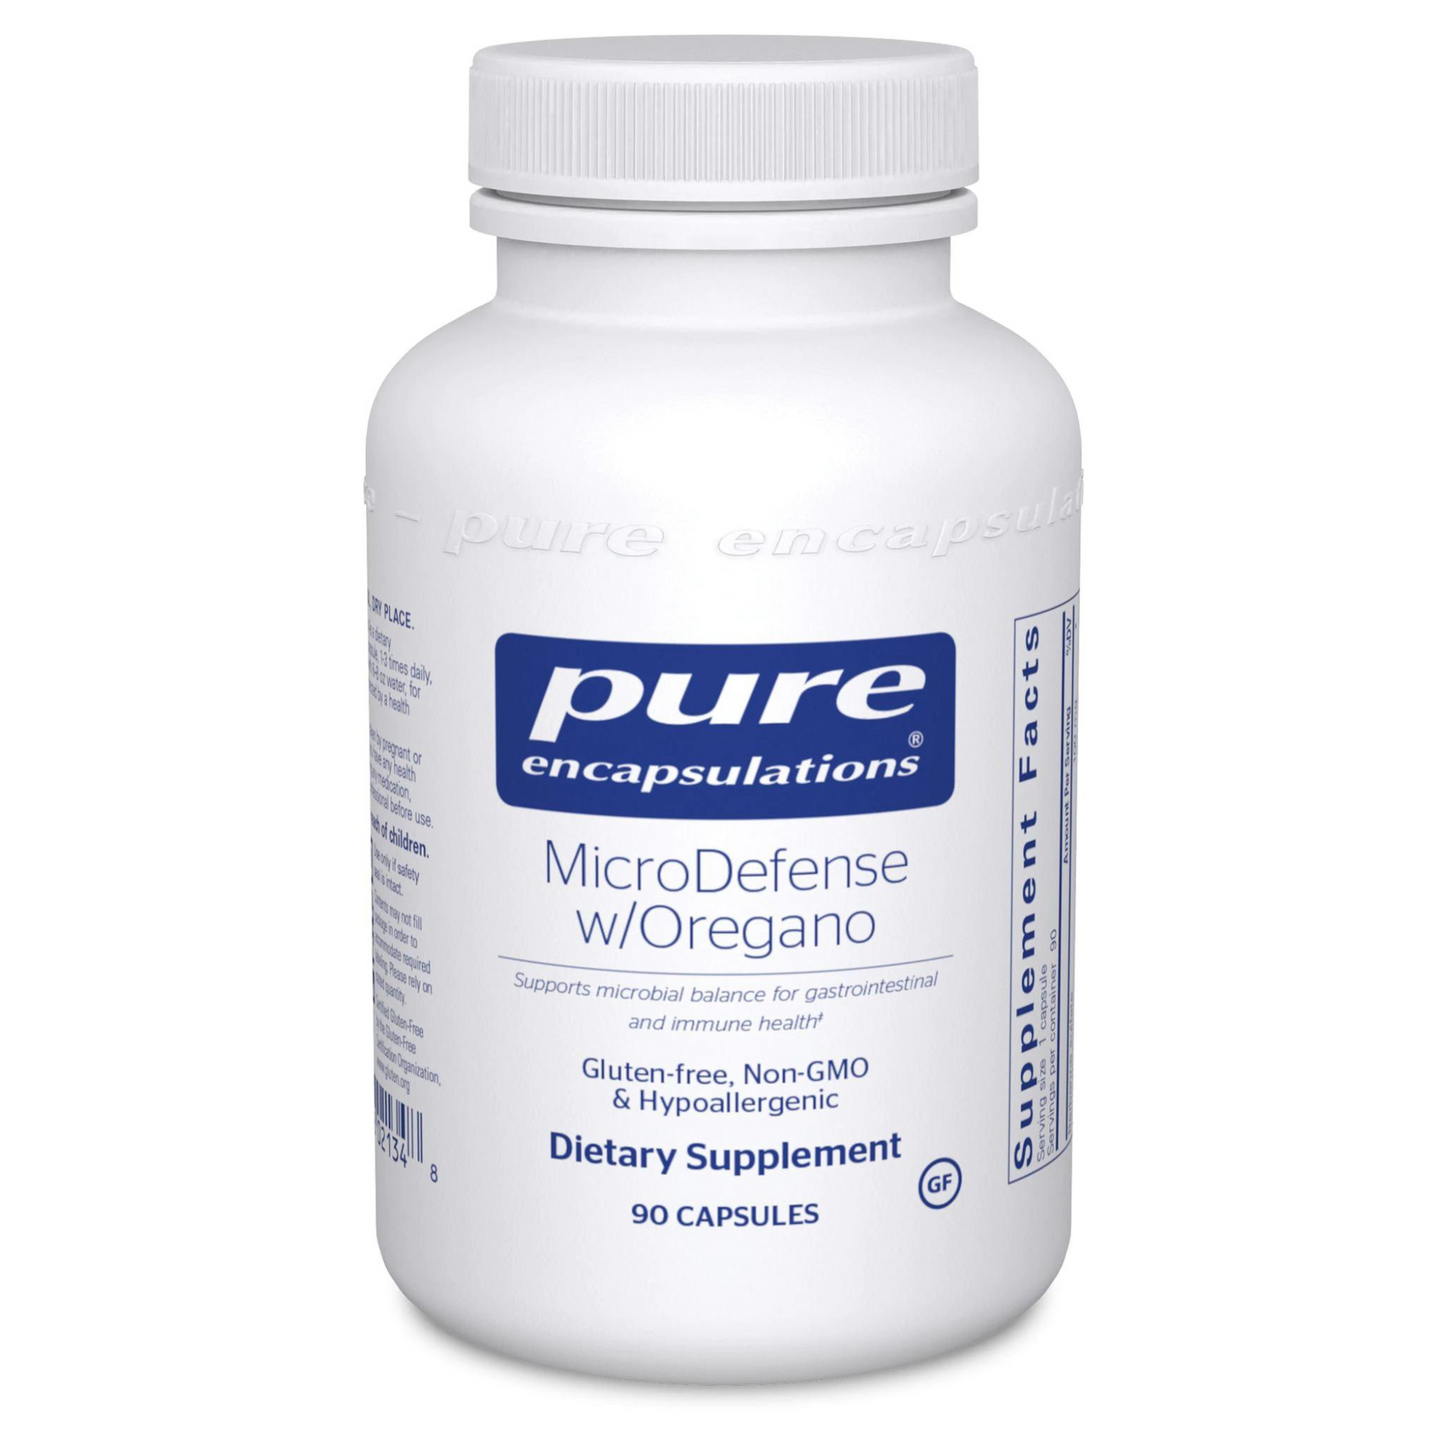 Primary Image of MicroDefense with Oregano Capsules (90 count)